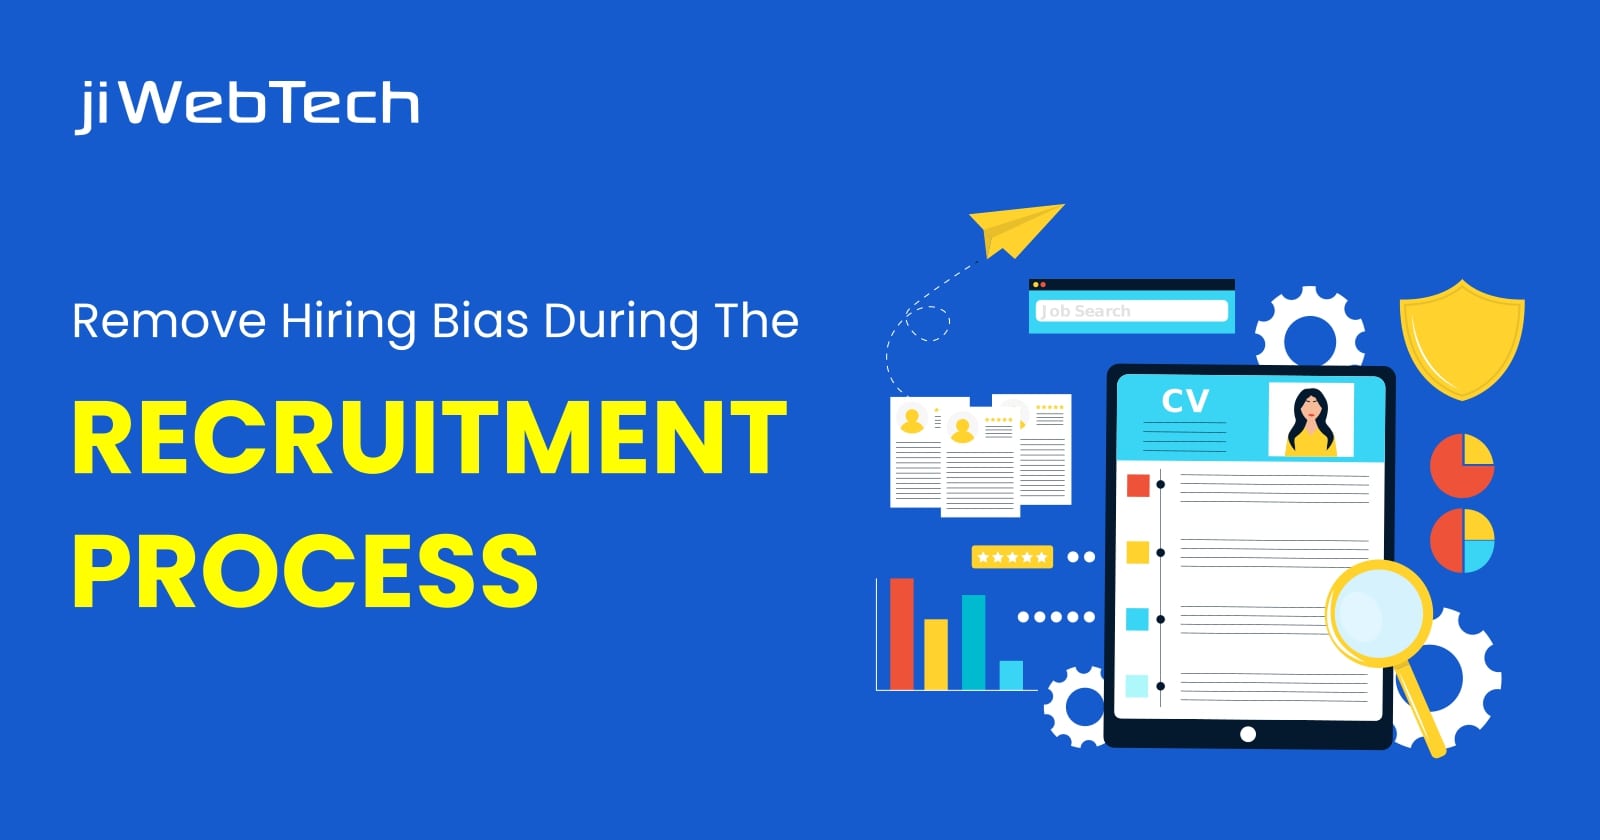 How Can You Remove Hiring Bias During The Recruitment Process?